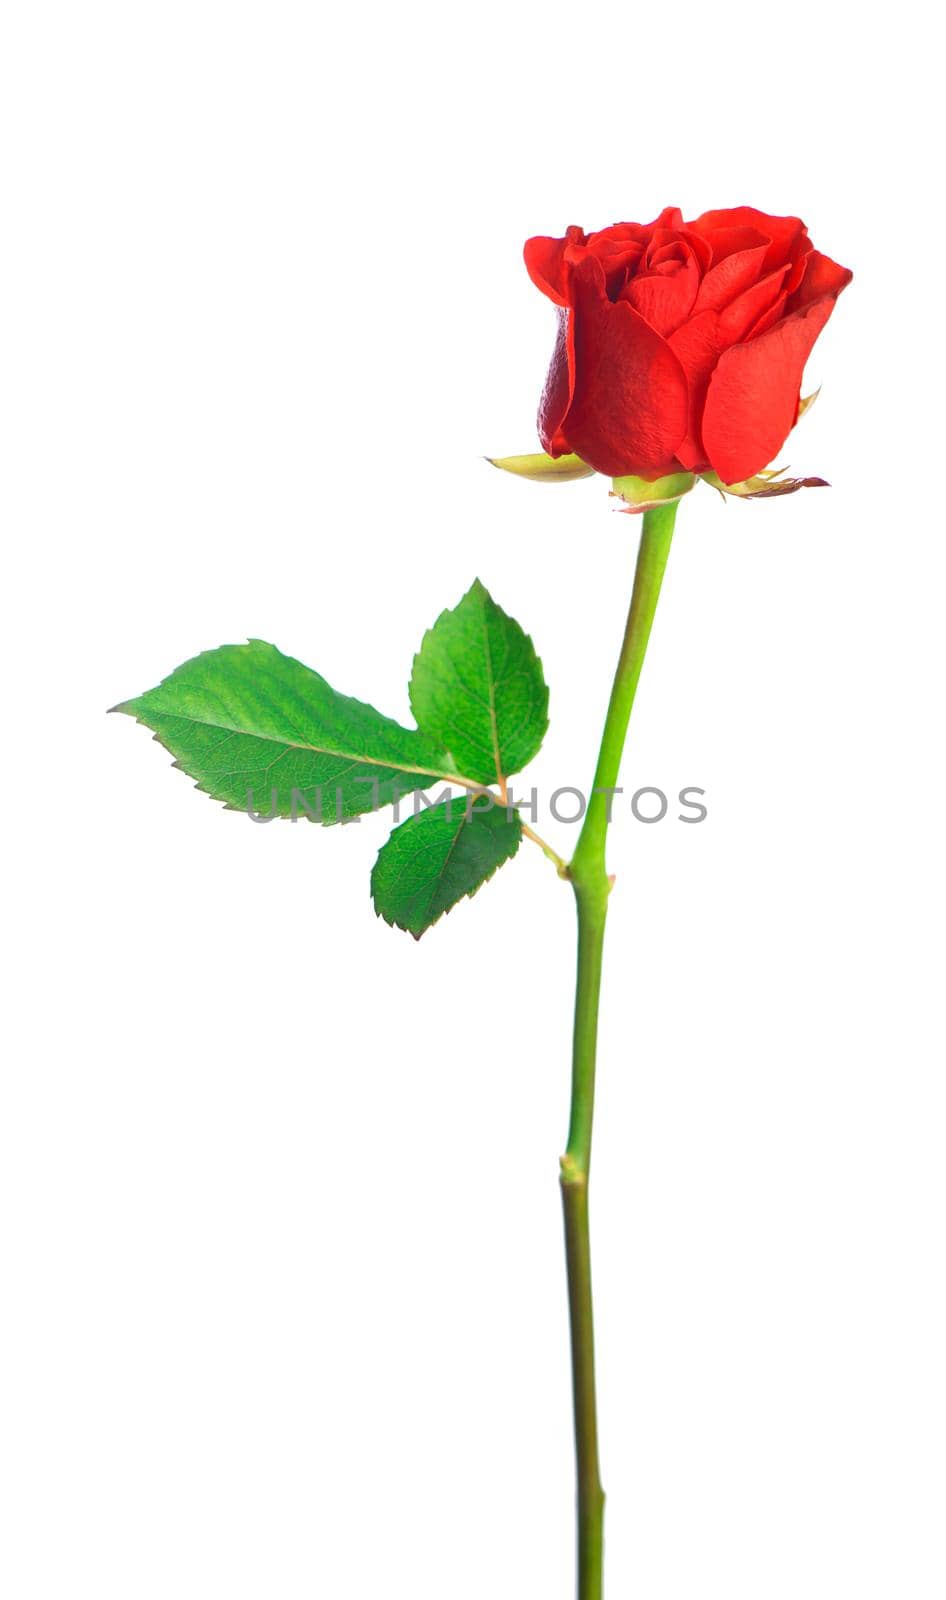 isolated red rose flower on a white background